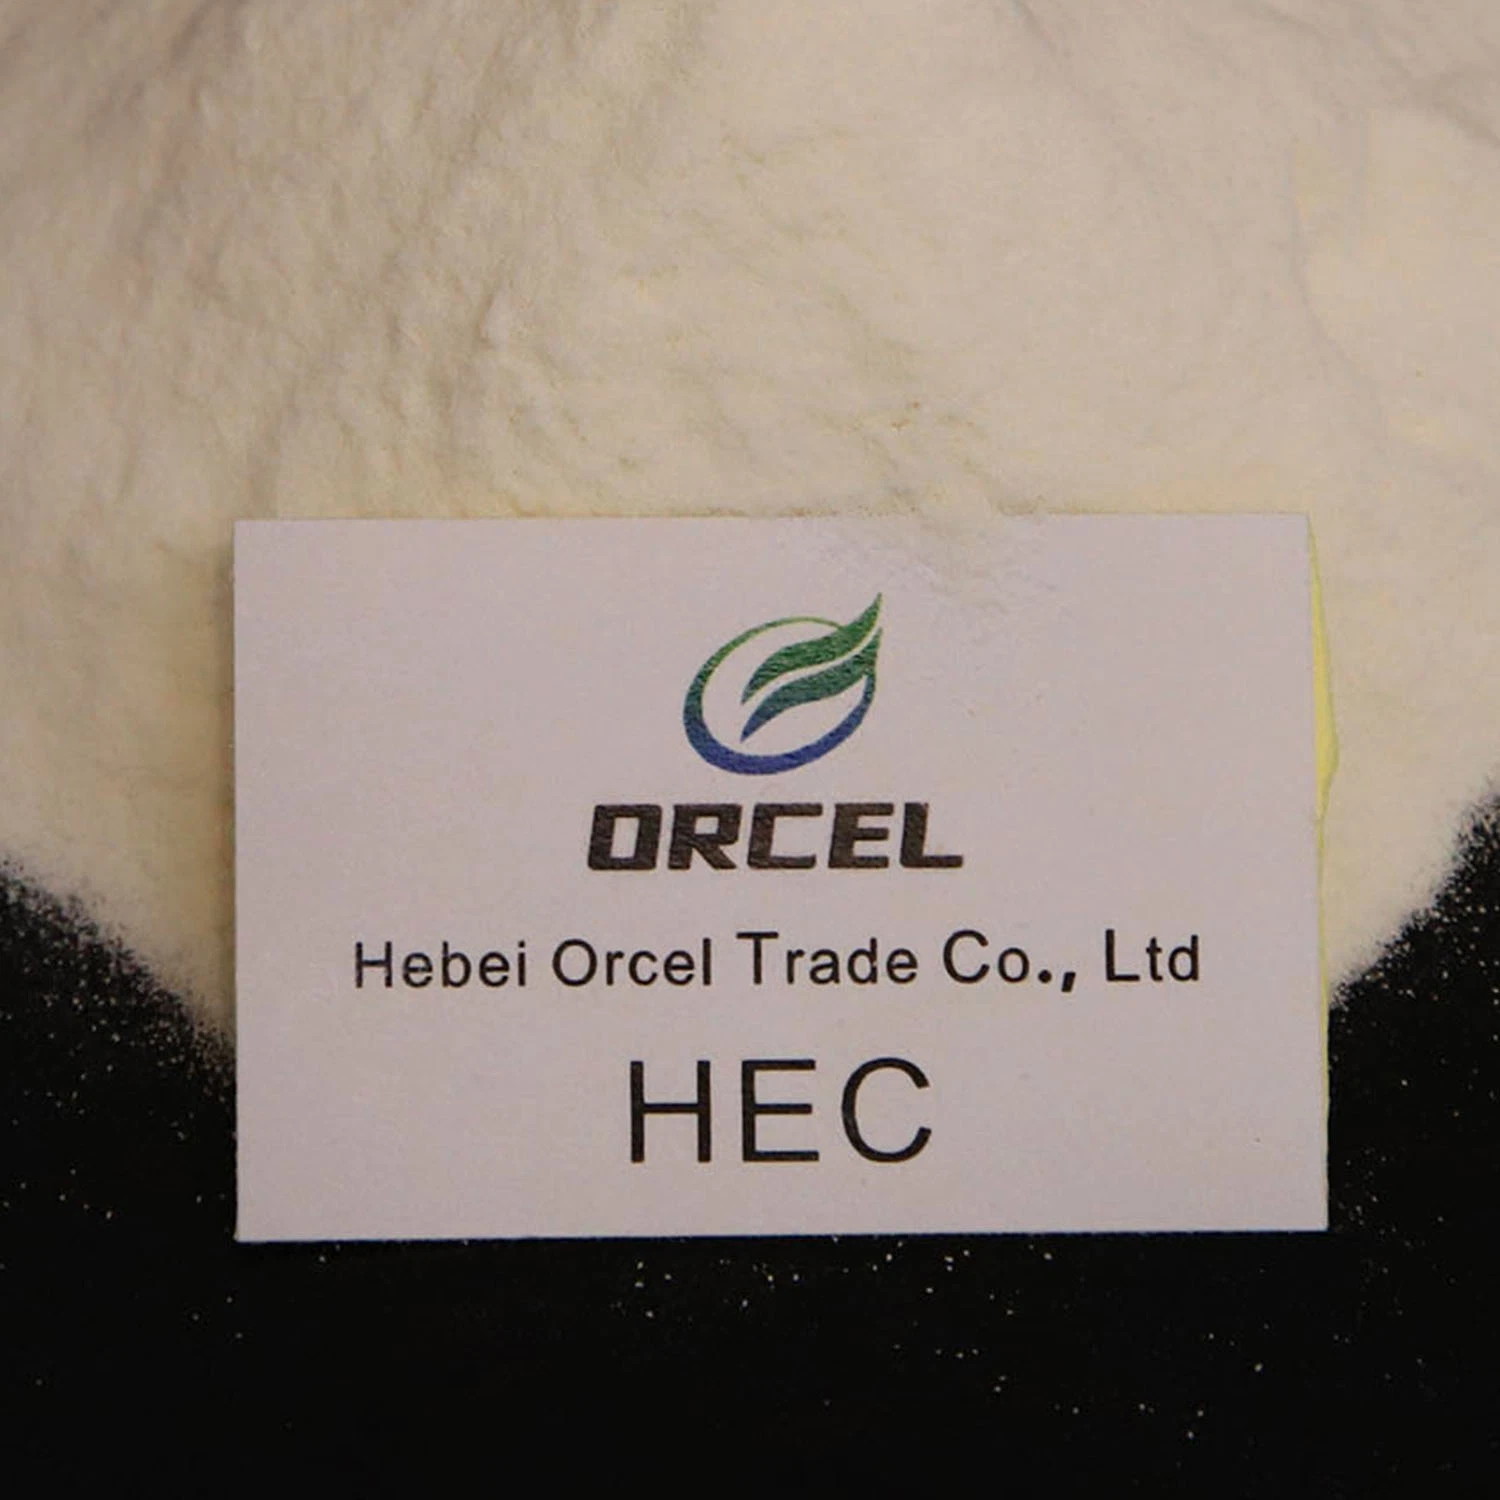 Liefern High Purity Hydroxyethylcellulose CAS 9004-62-0 auf Lager